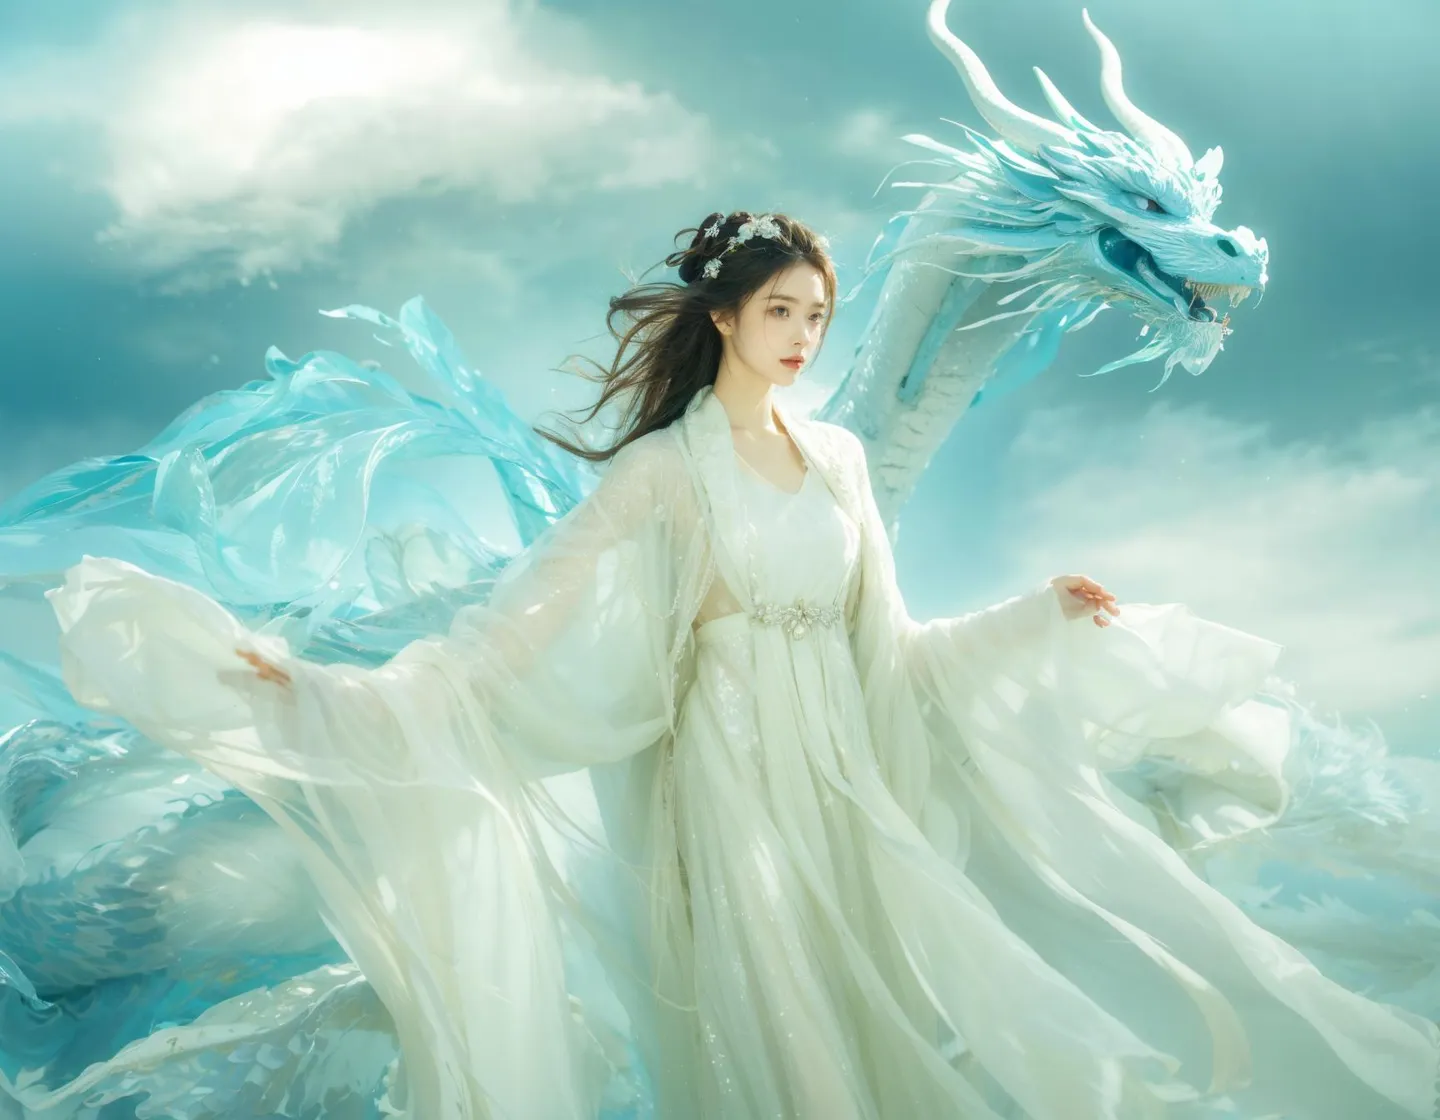 Ethereal woman in a flowing white dress standing beside a majestic white dragon amidst a serene, cloudy sky. AI generated image using stable diffusion.